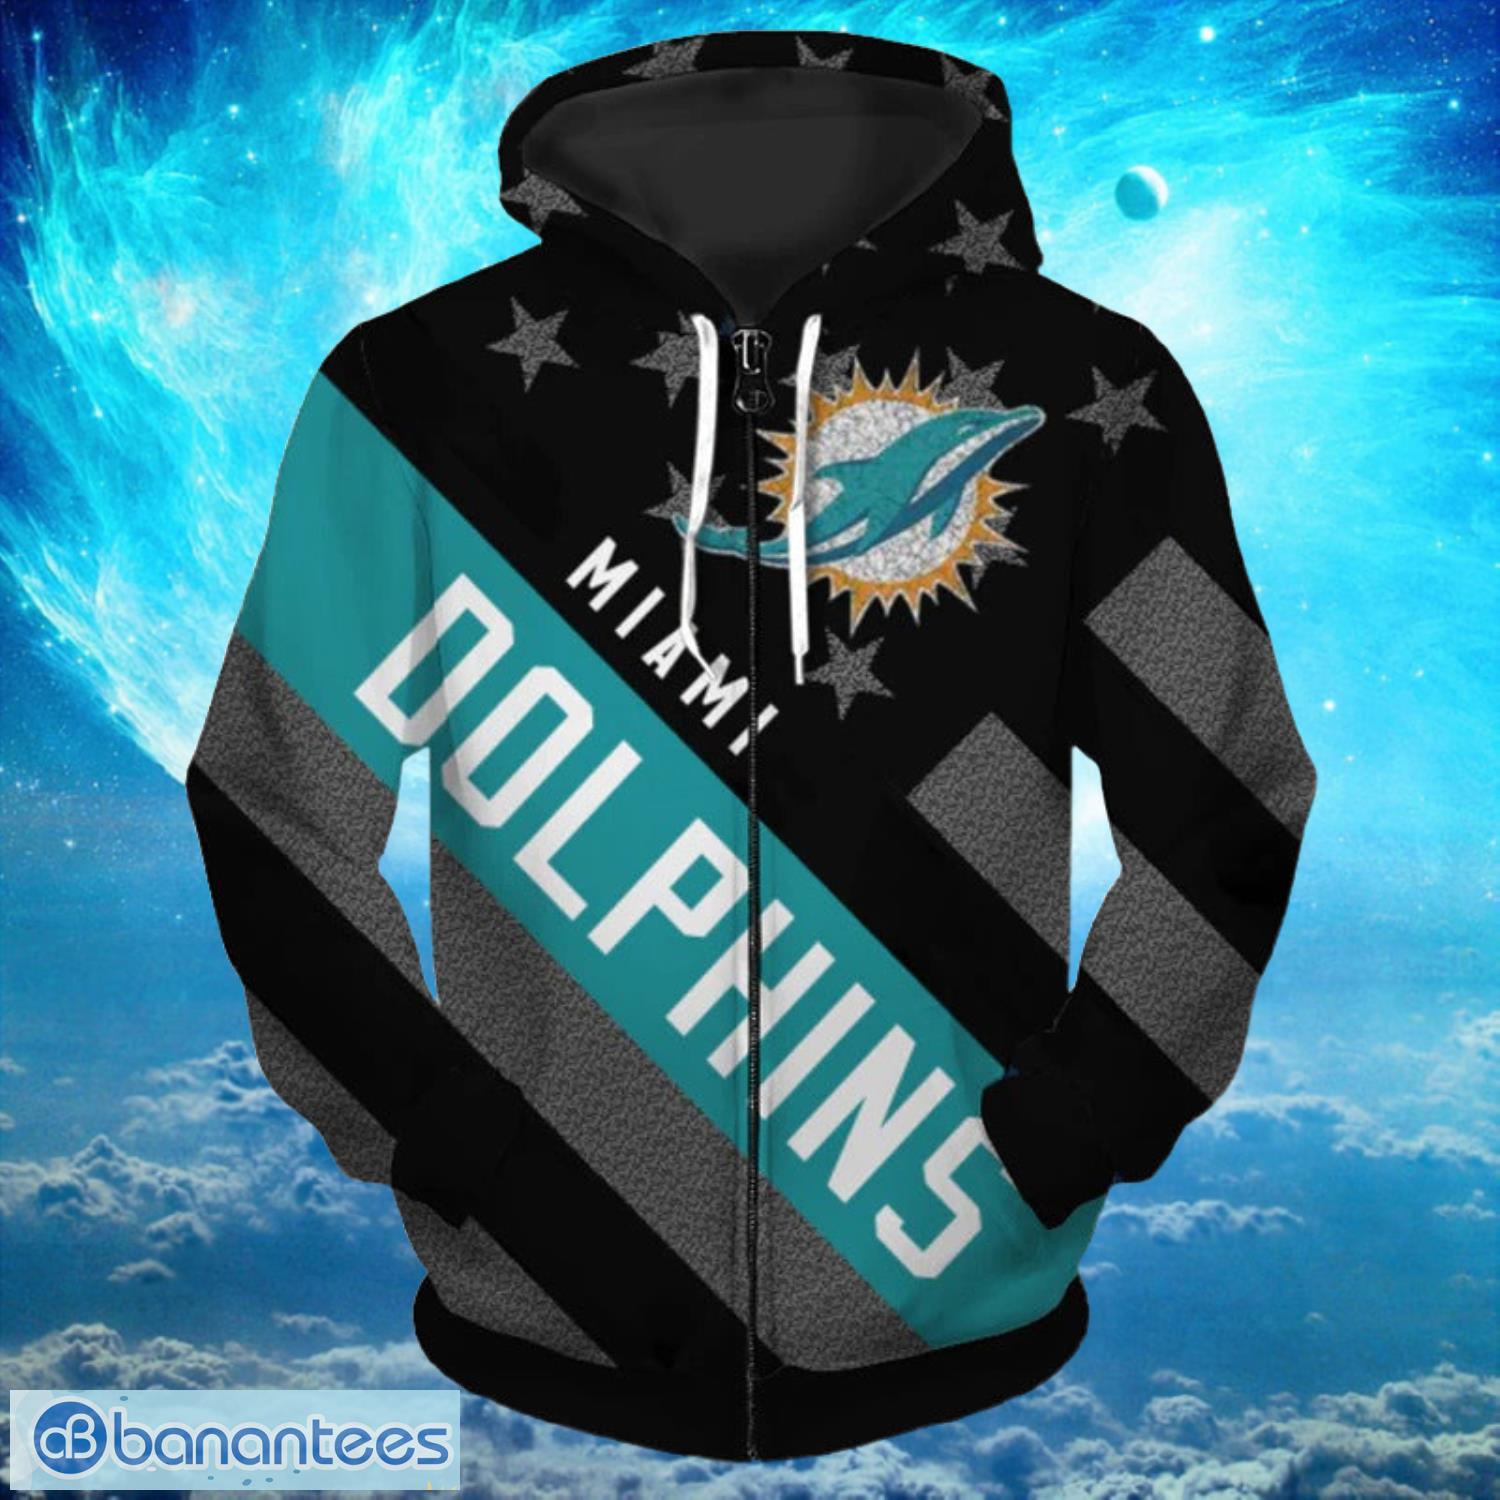 Miami Dolphins Zipper Striped Banner Dark Type Hoodies Print Full Product Photo 1